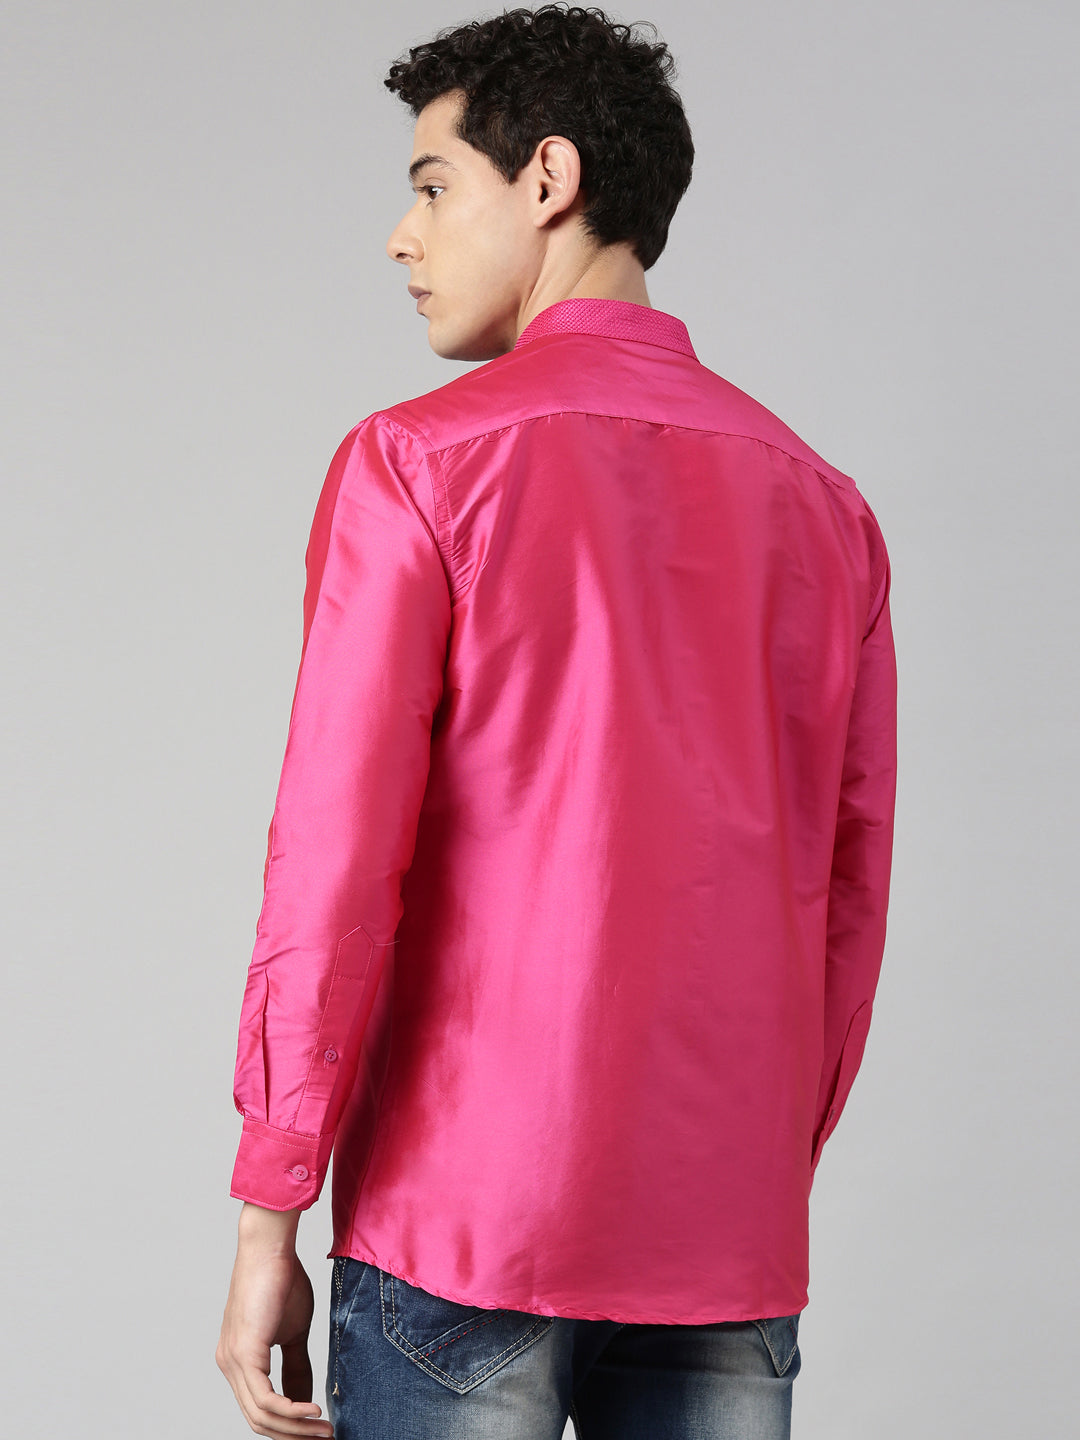 Fuchsia Color Art Silk Slim Fit Solid Party Shirt